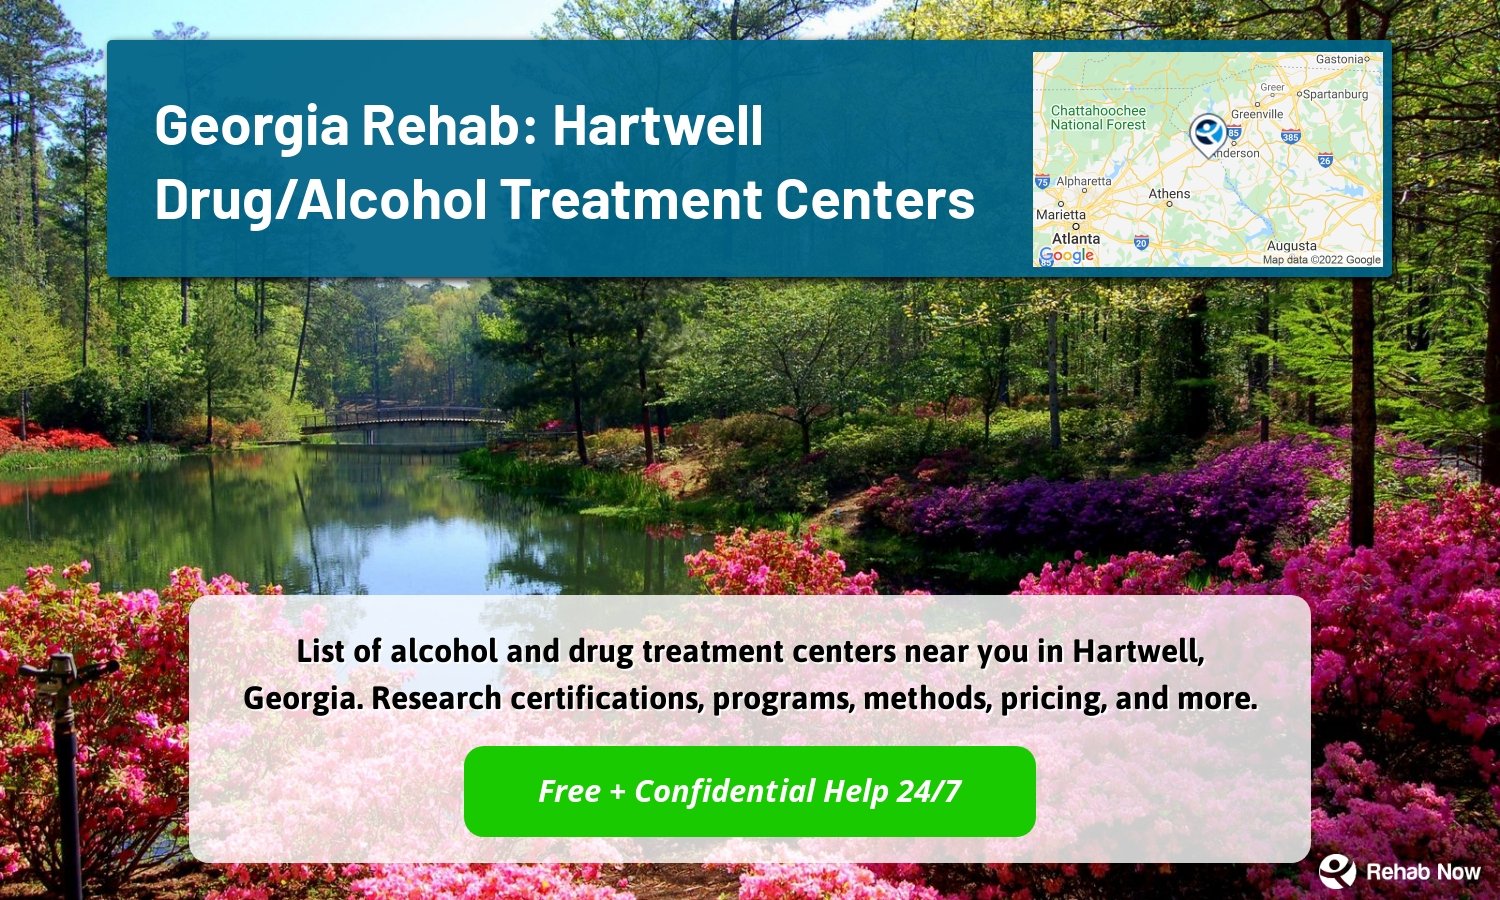 List of alcohol and drug treatment centers near you in Hartwell, Georgia. Research certifications, programs, methods, pricing, and more.